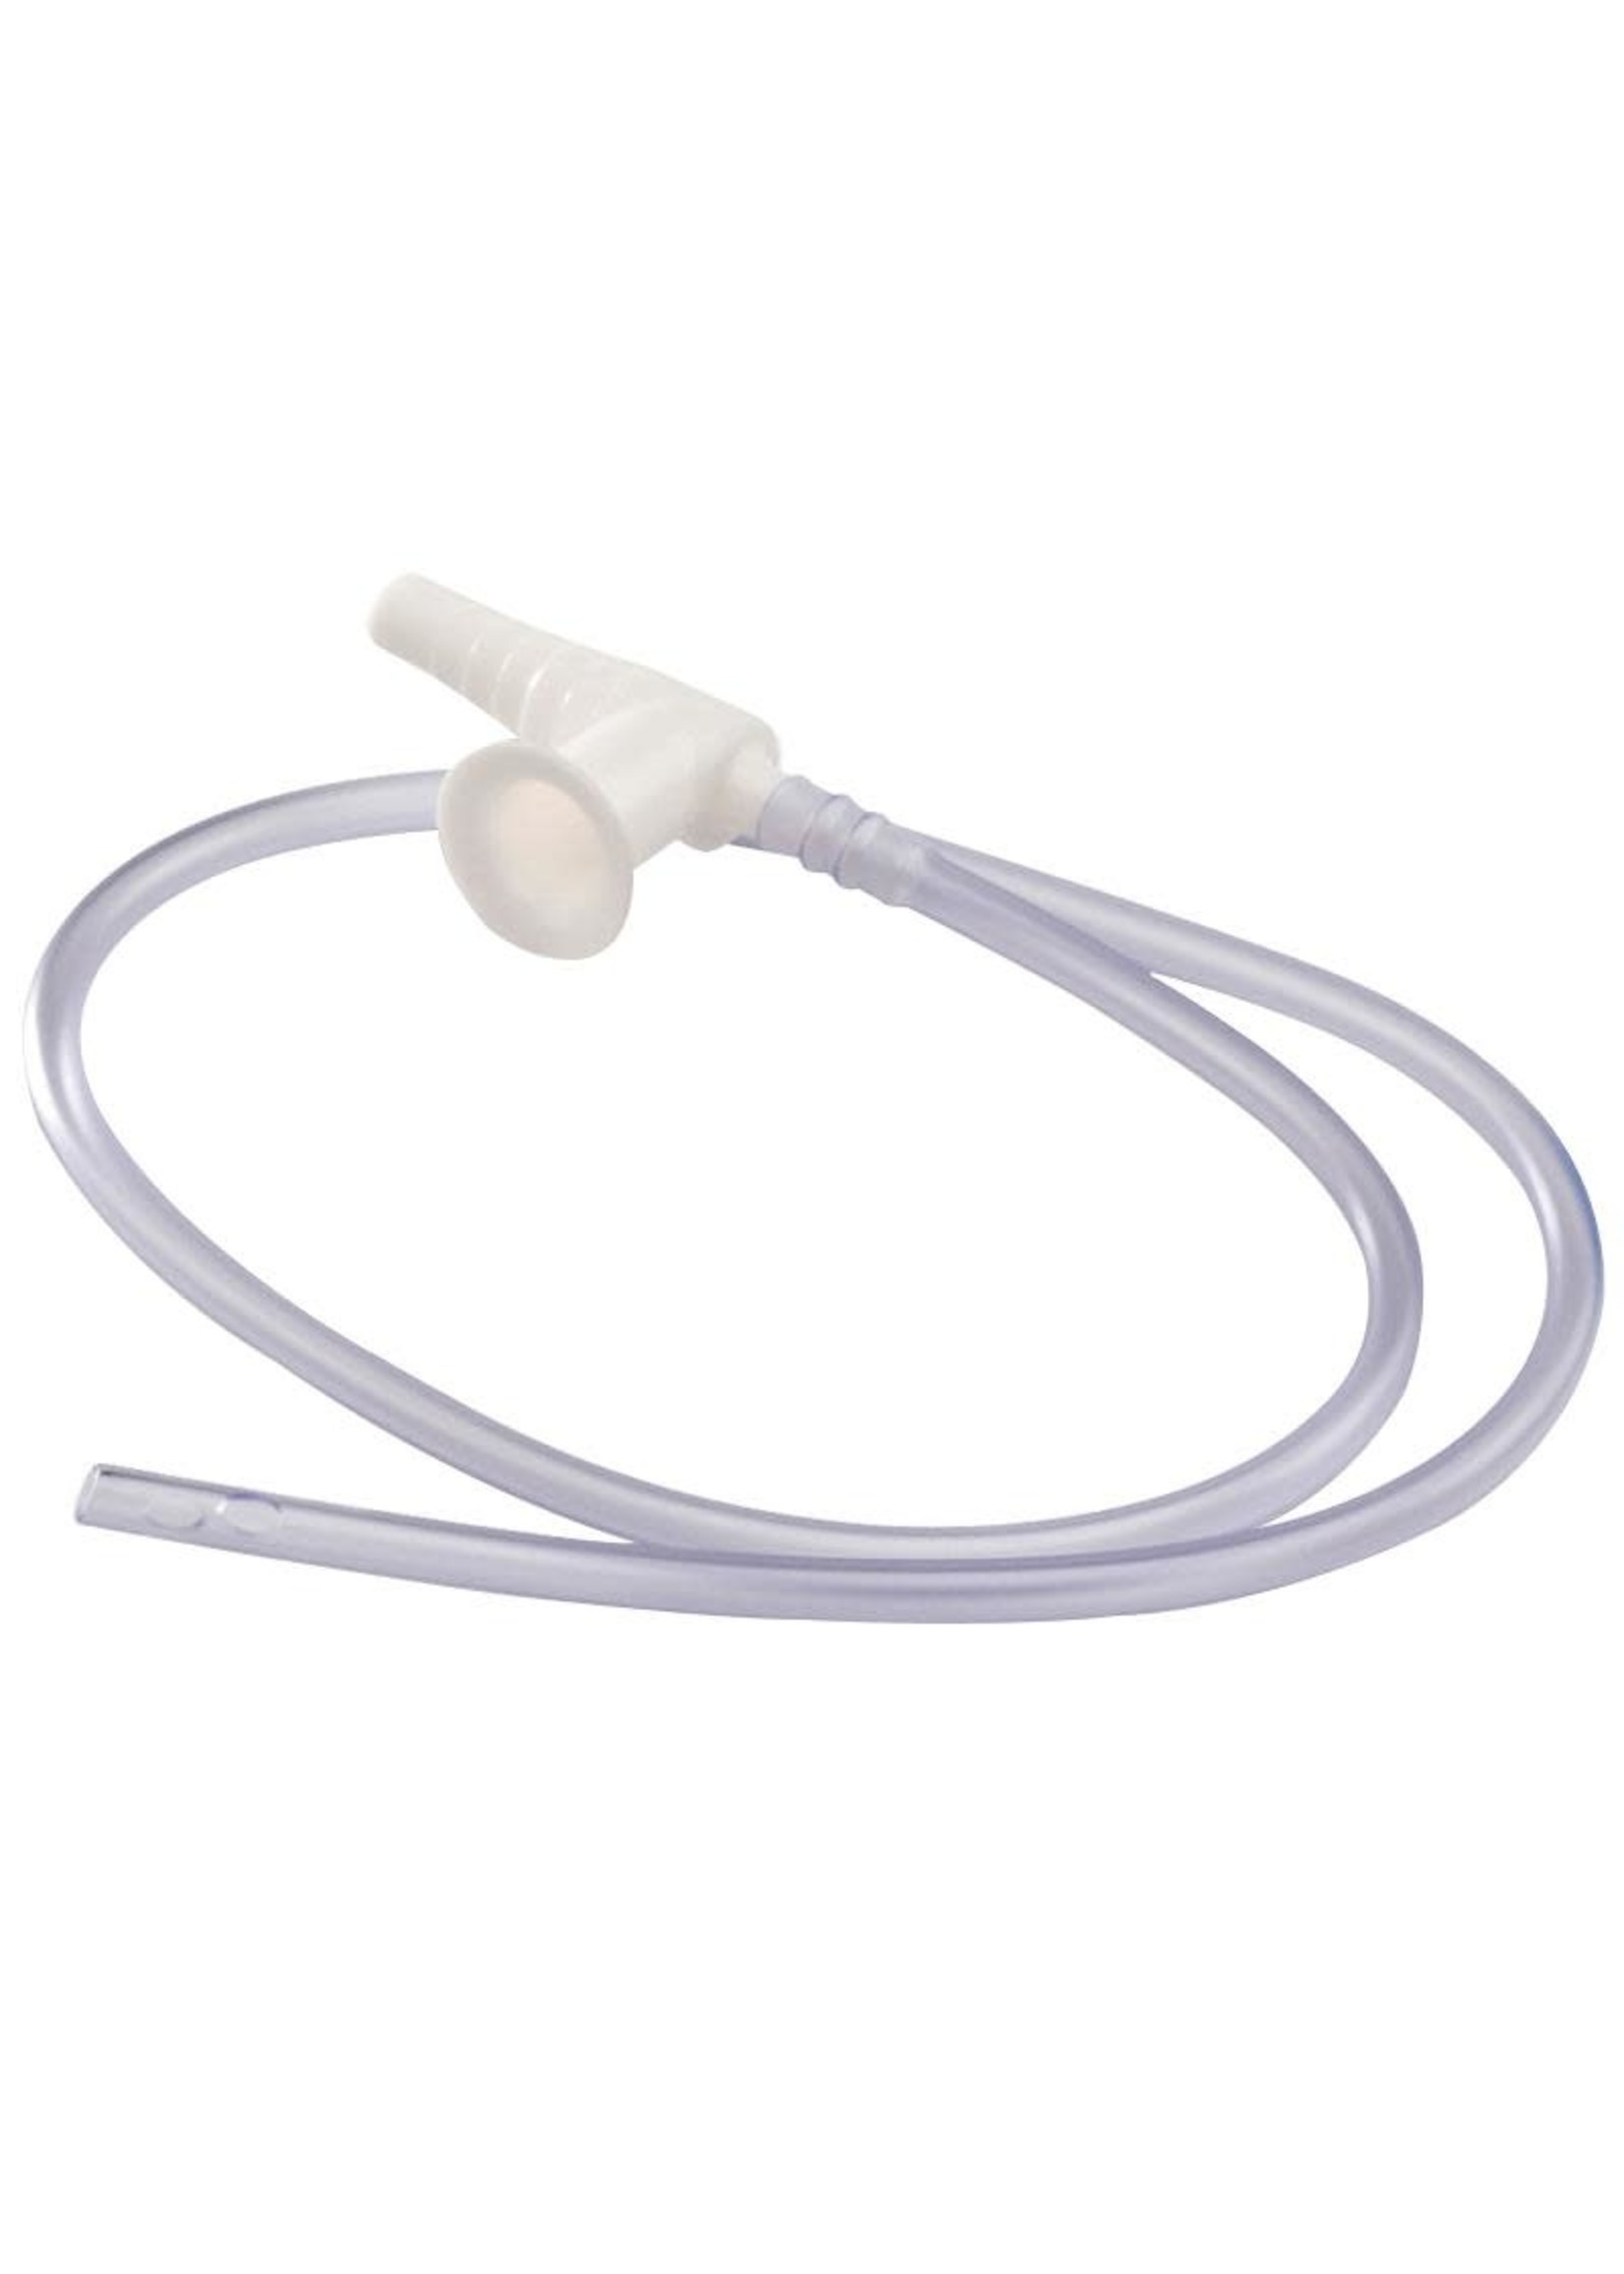 Suction Catheter, 18 French